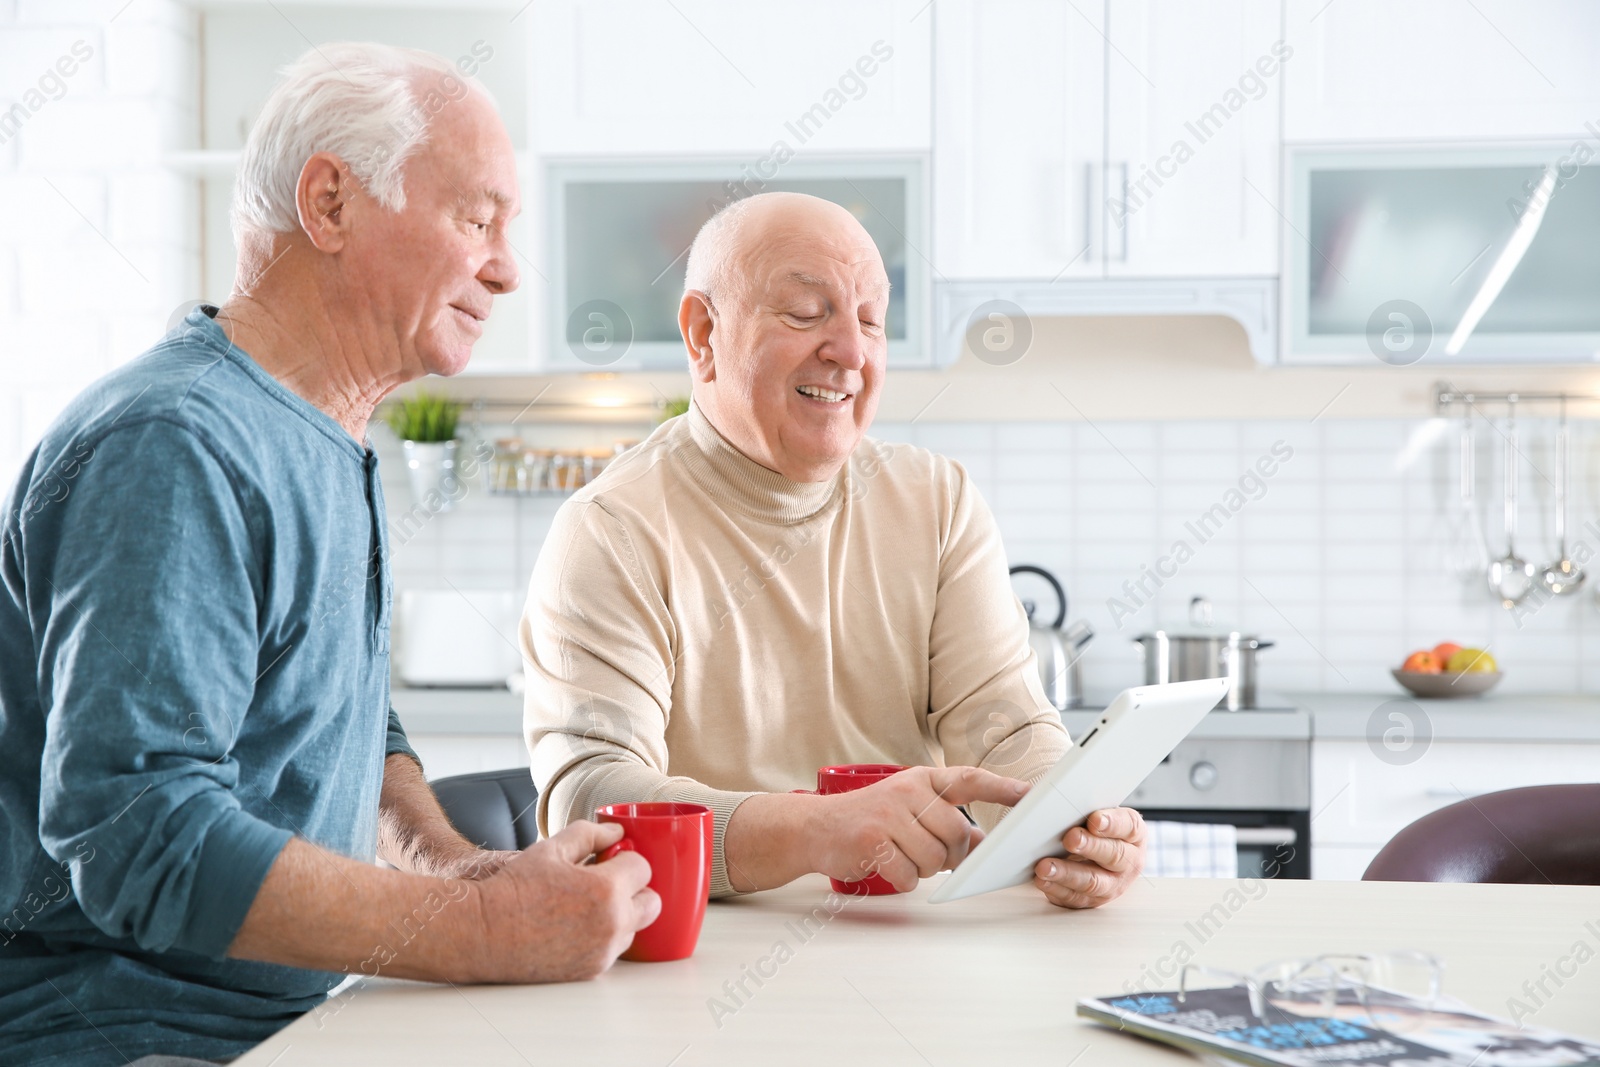 Photo of Elderly men using tablet PC at table in kitchen